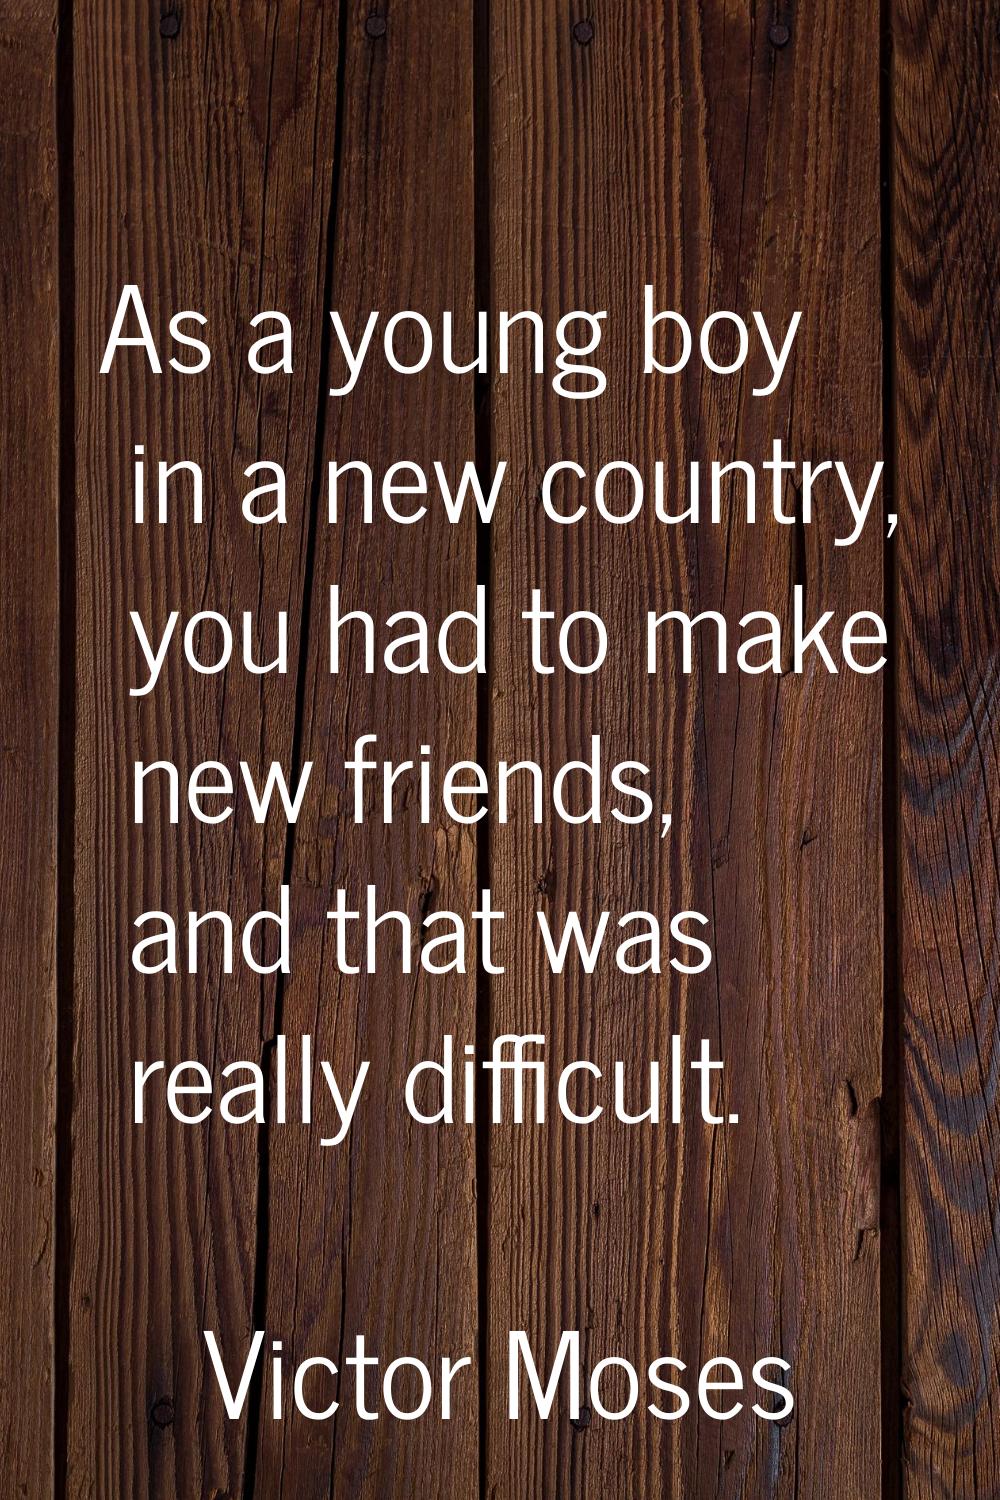 As a young boy in a new country, you had to make new friends, and that was really difficult.